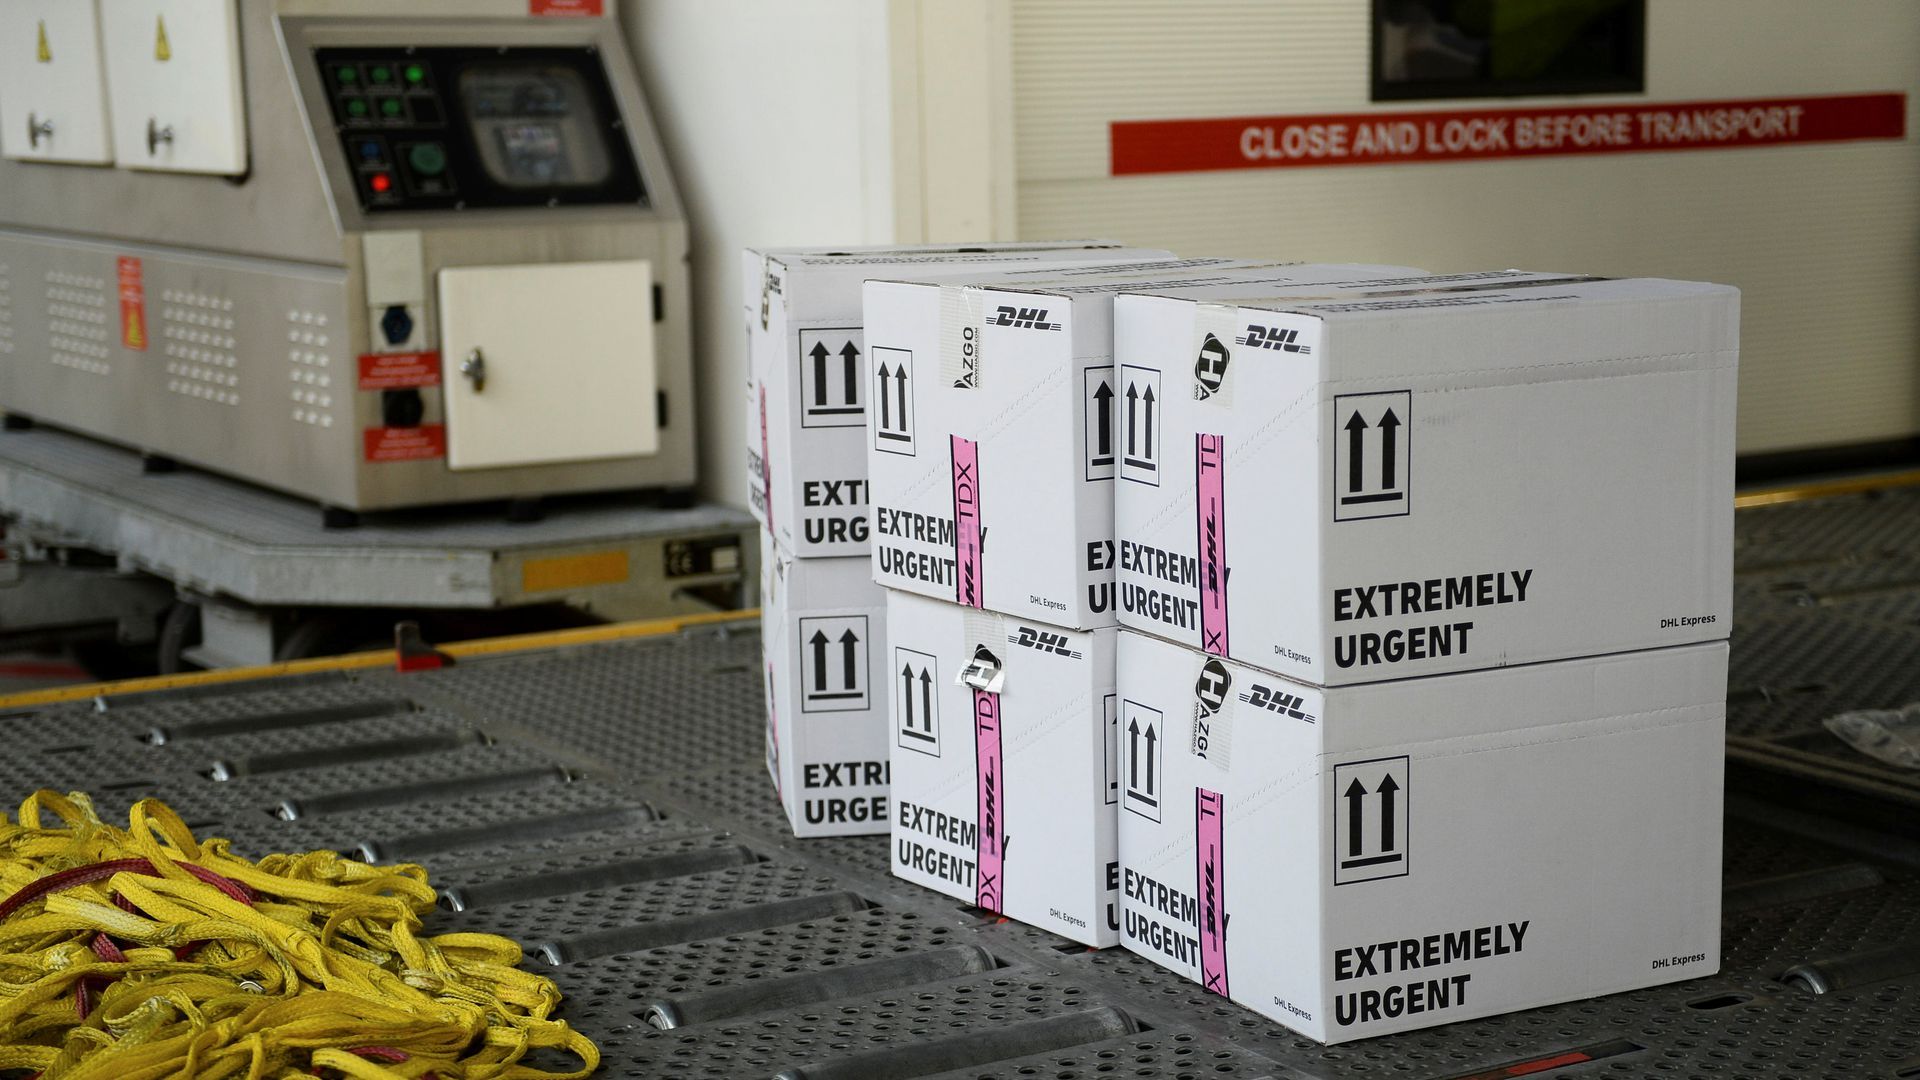 A stack of boxes that say "extremely urgent" on the side.